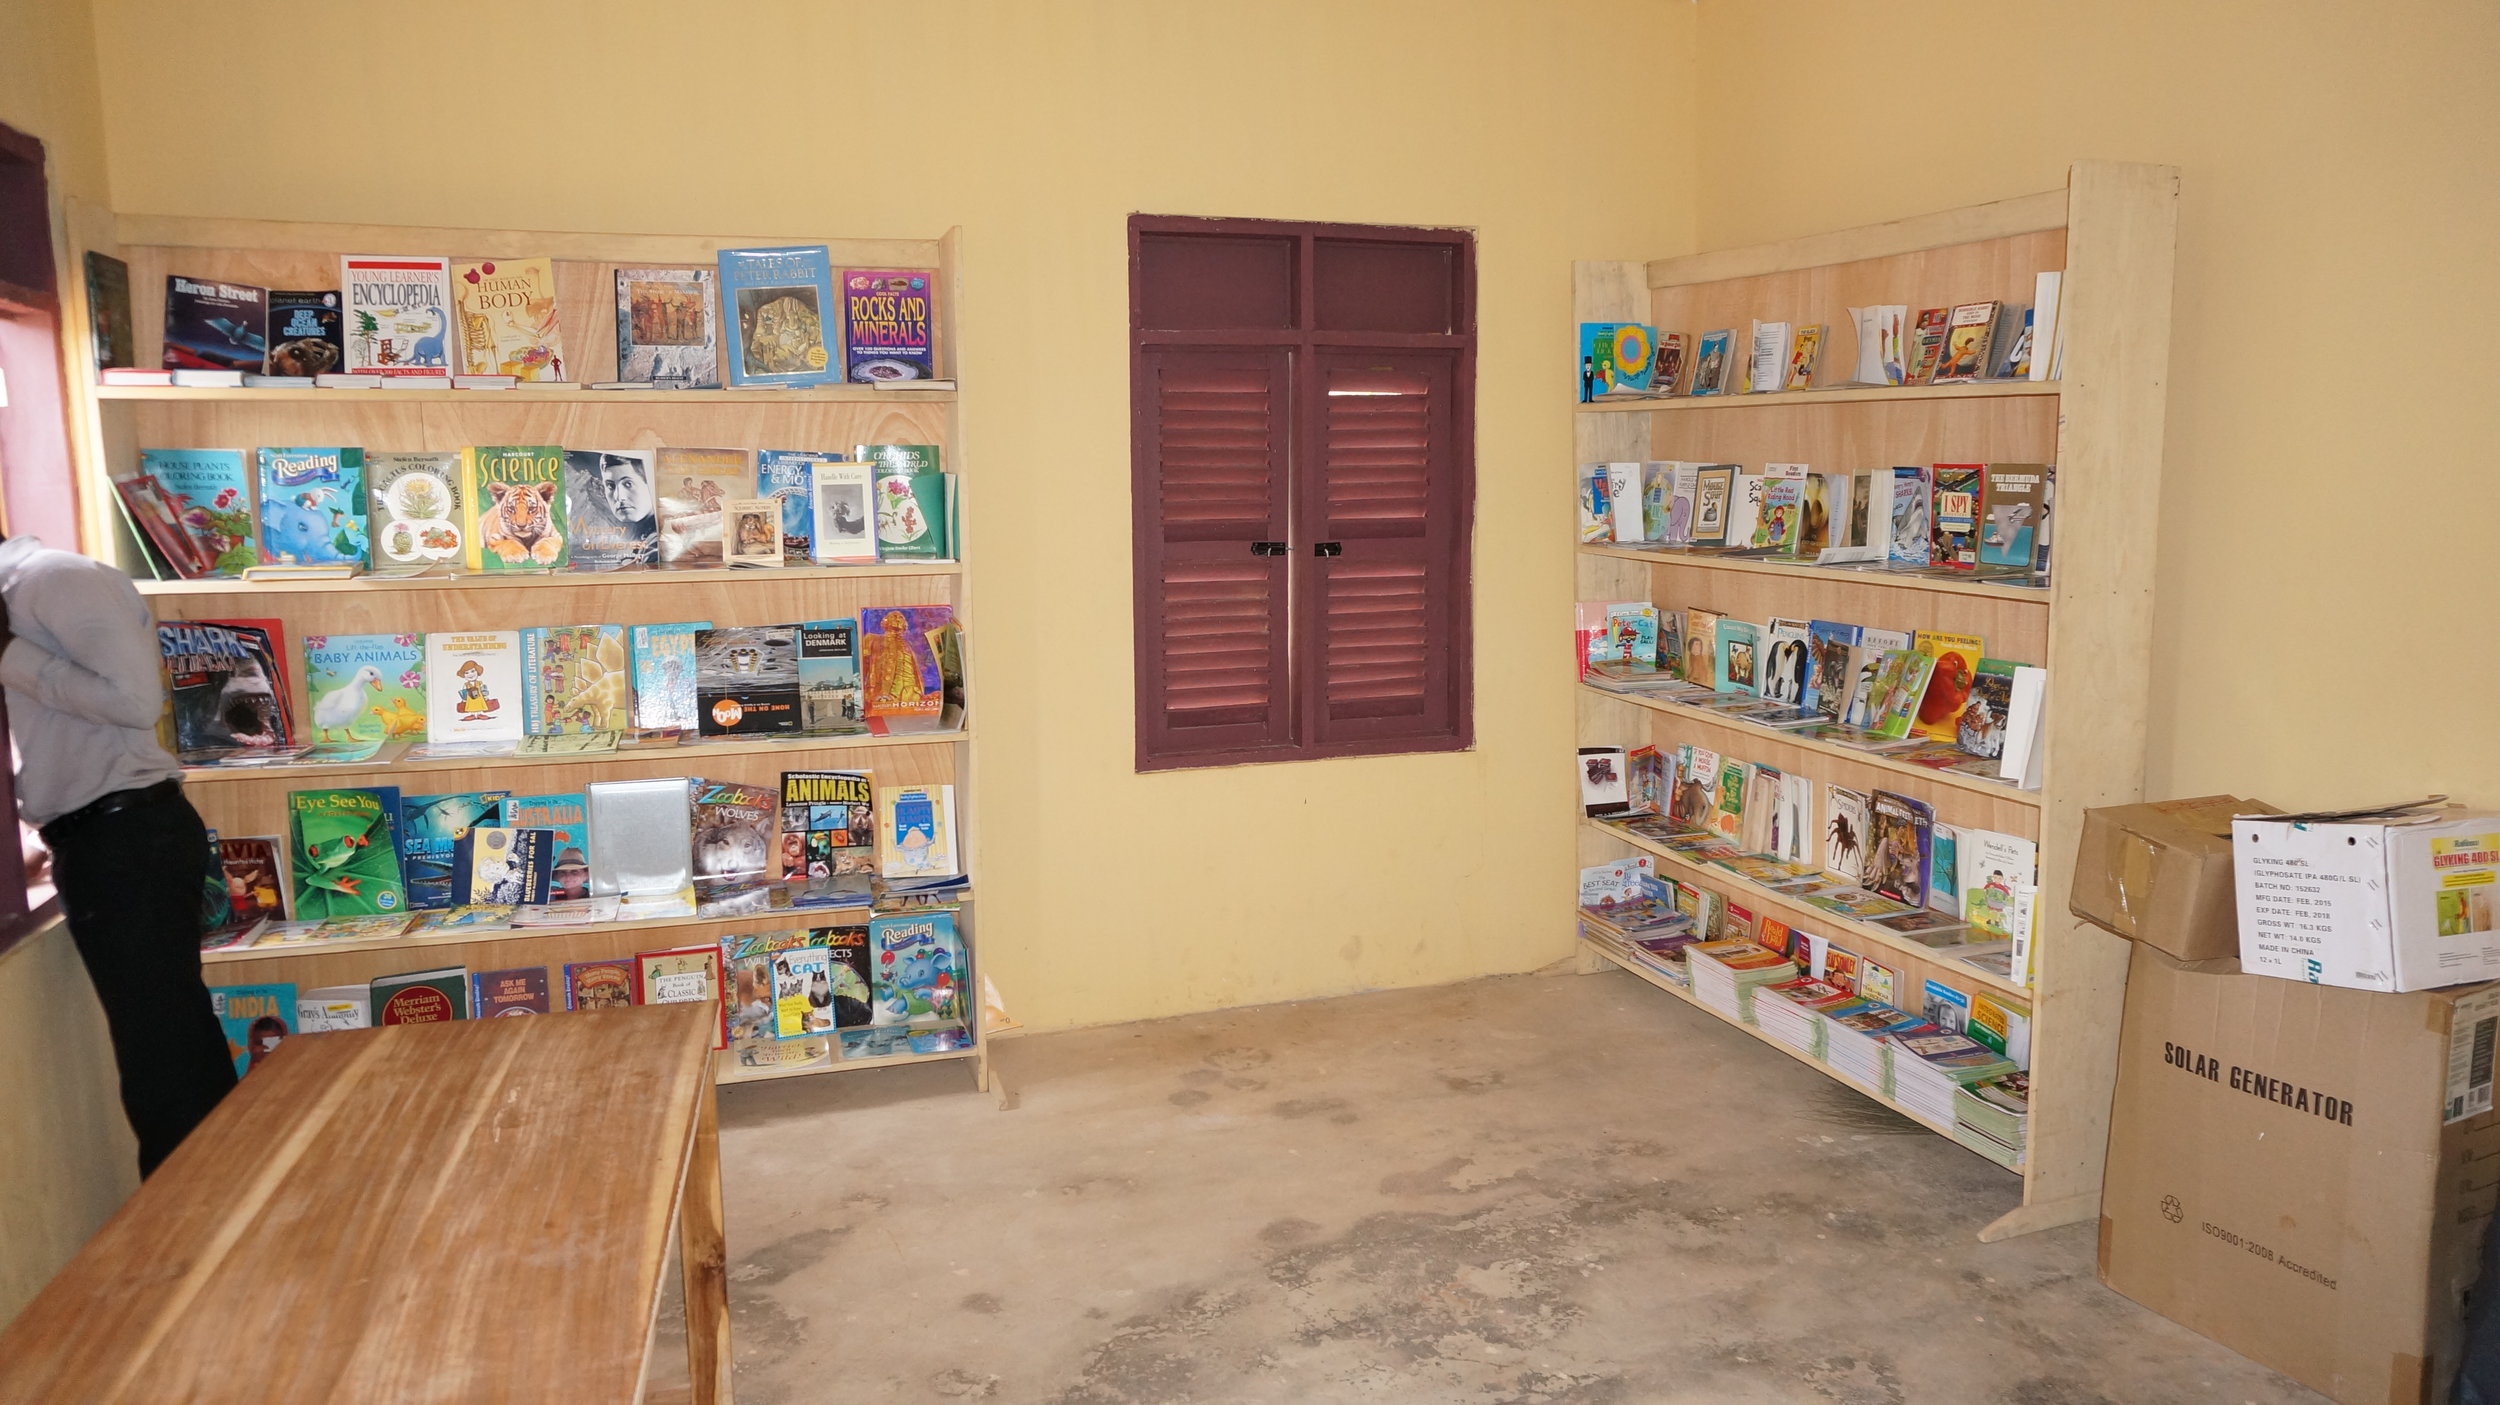 We provided shelves, tables, and 1000 books to fill school libraries.